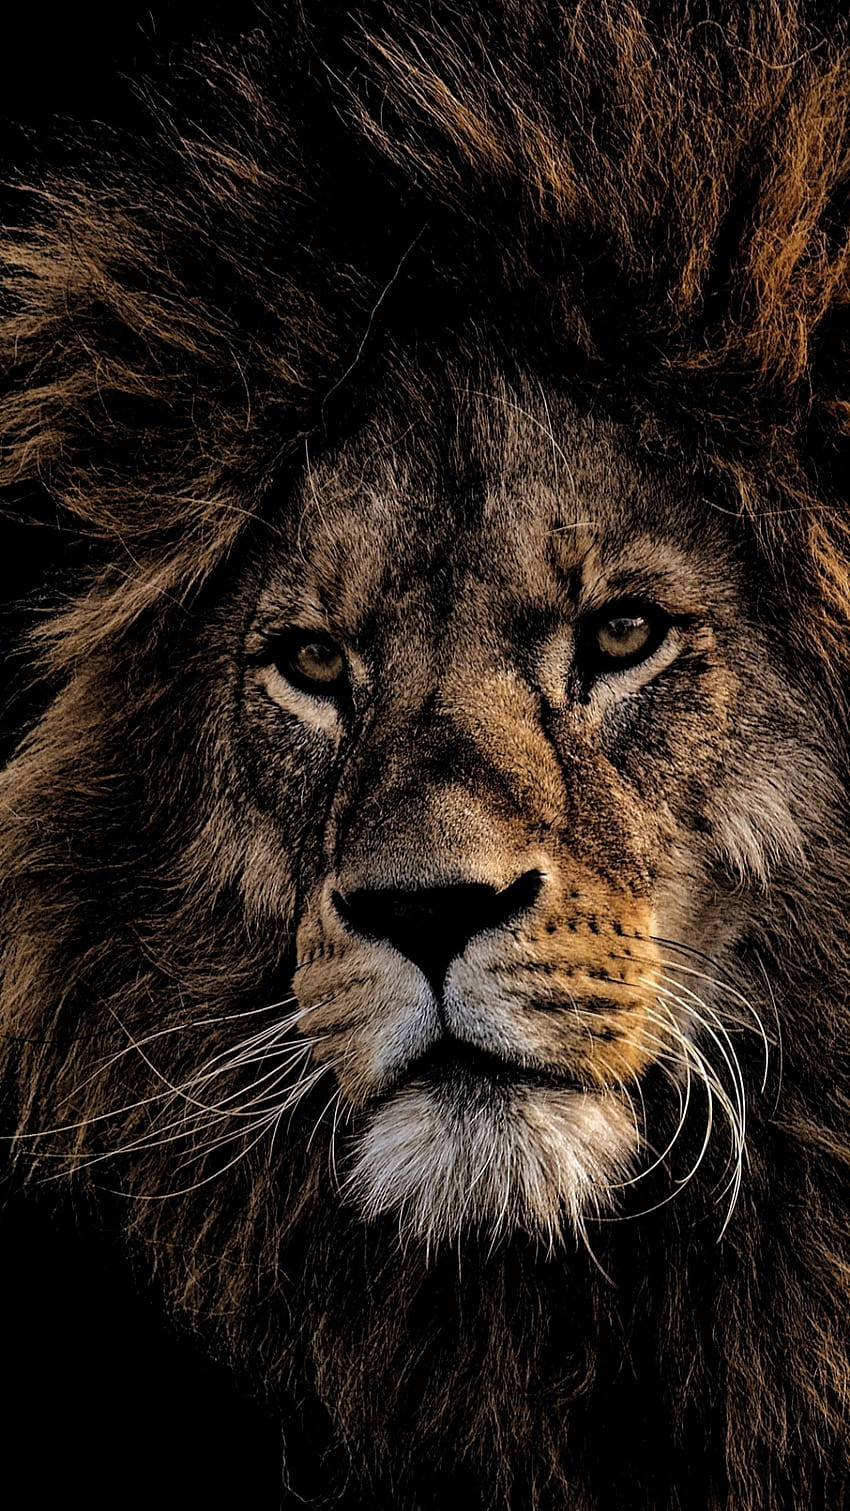 IPhone wallpaper of a lion staring into the camera. - Lion